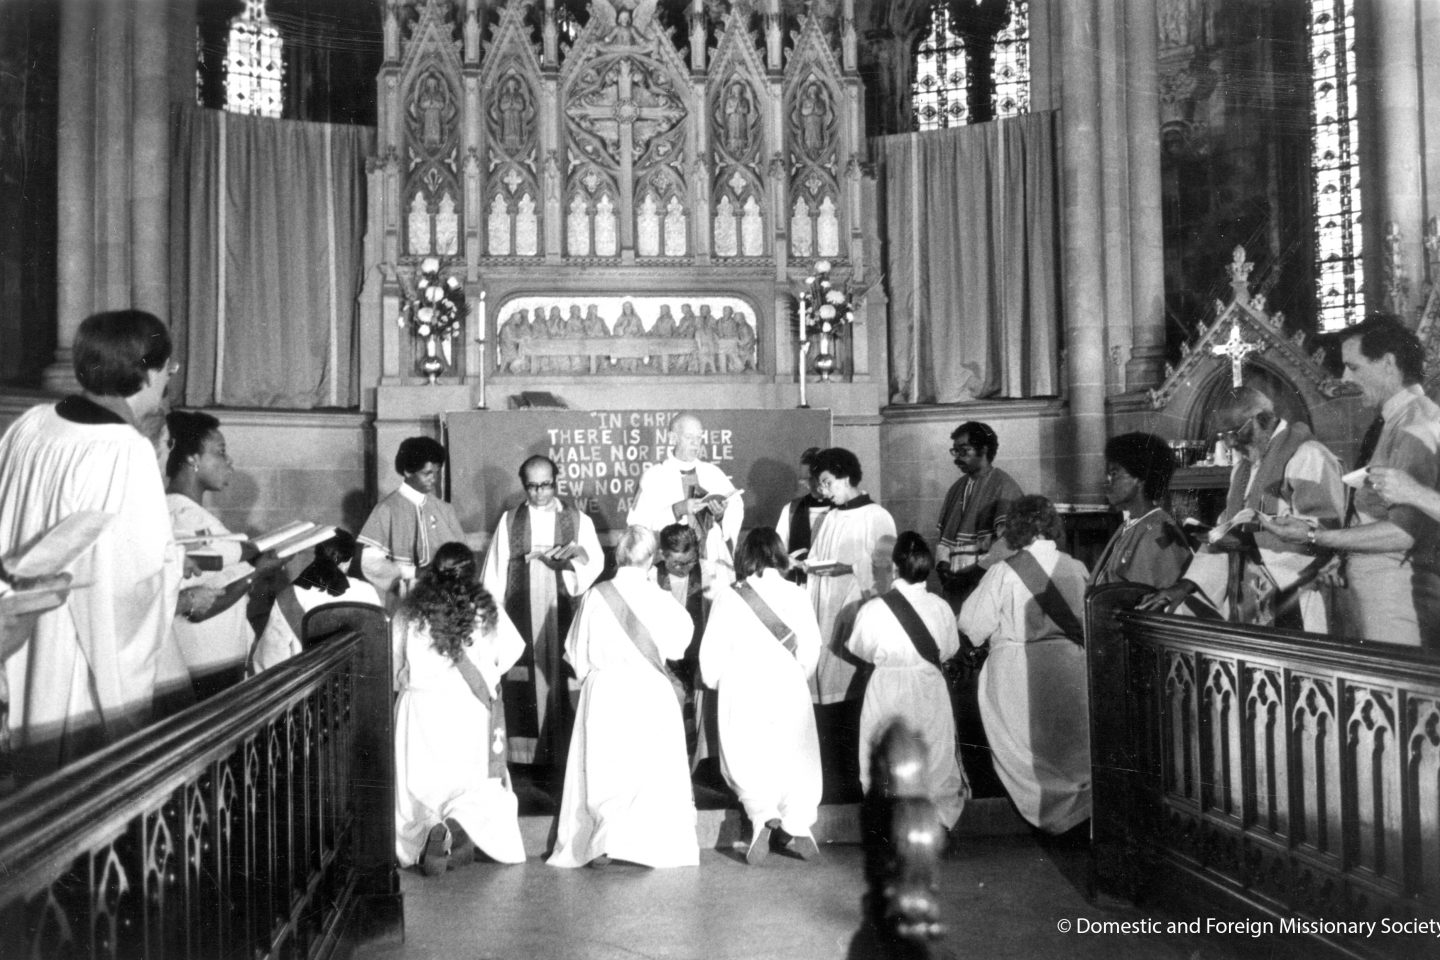 Photo: DFMS; Eleven women kneel at the altar of the Church of the Advocate, Philadelphia, during their ordination to the priesthood on July 29, 1974.